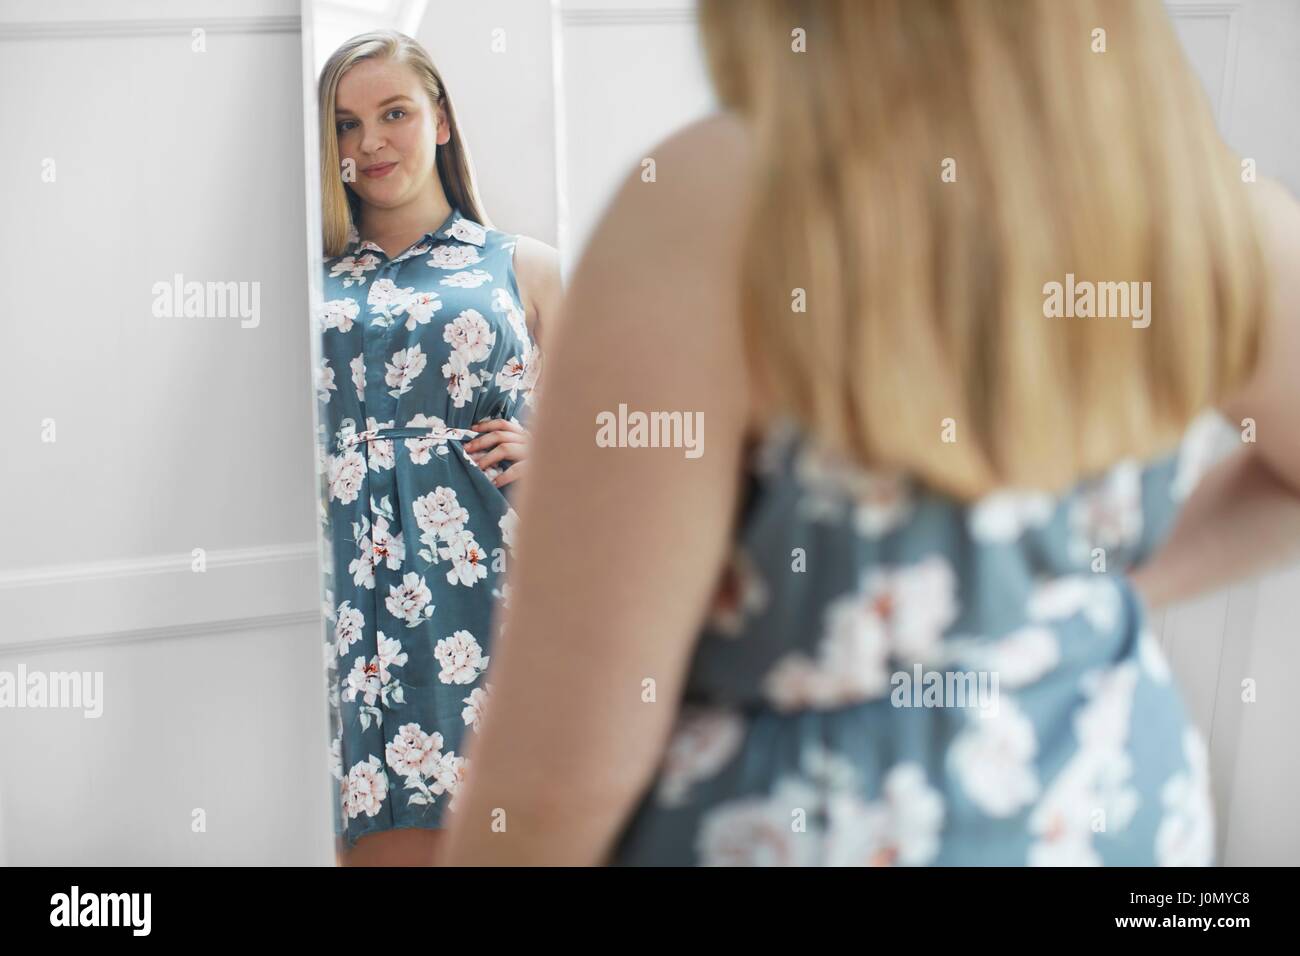 Young woman looking at reflection in mirror, smiling. Stock Photo